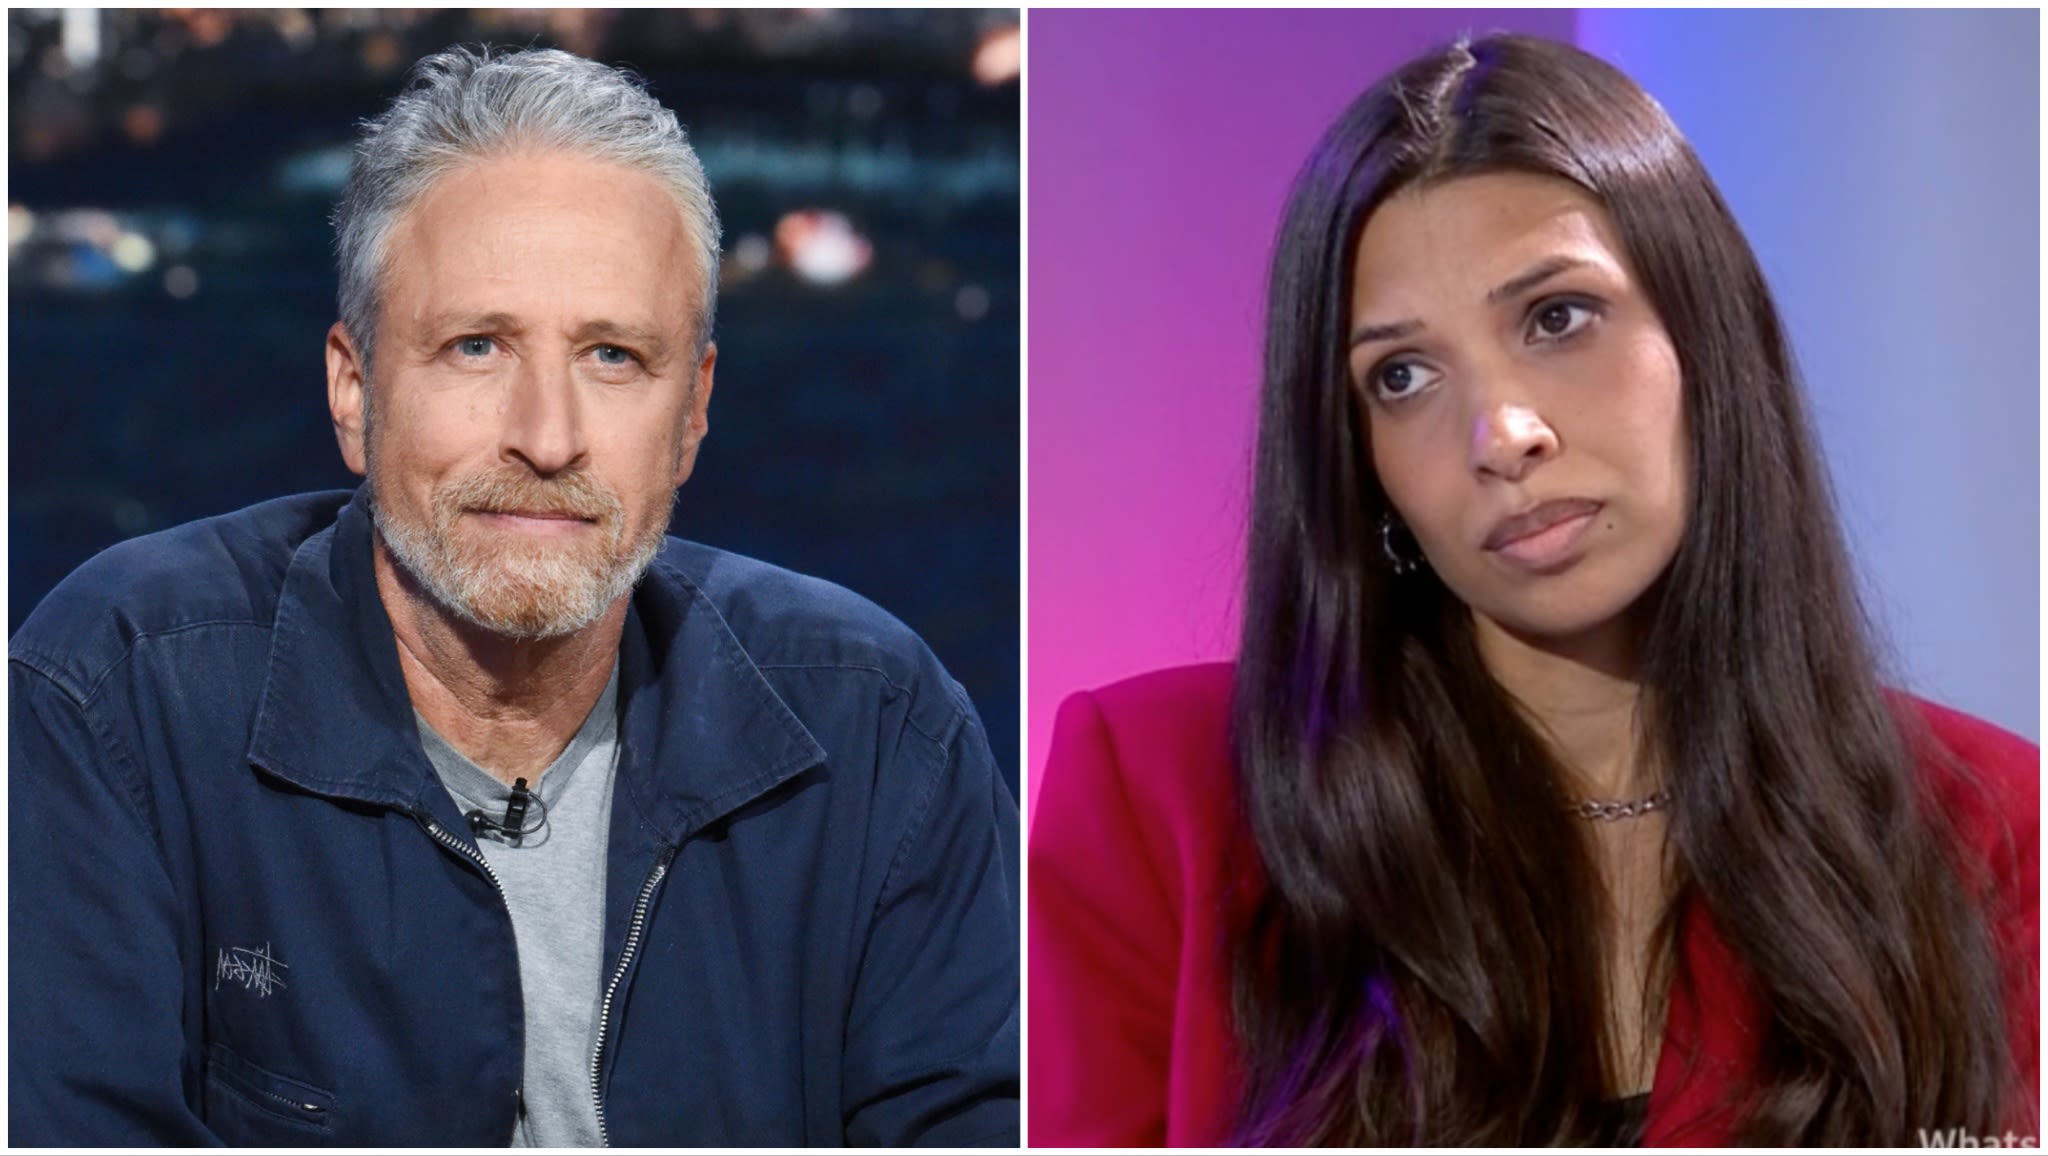 Jon Stewart Wades Into Row Over UK Election Hopeful’s Israel Tweets: “Dumbest Thing The UK Has Done Since Electing...